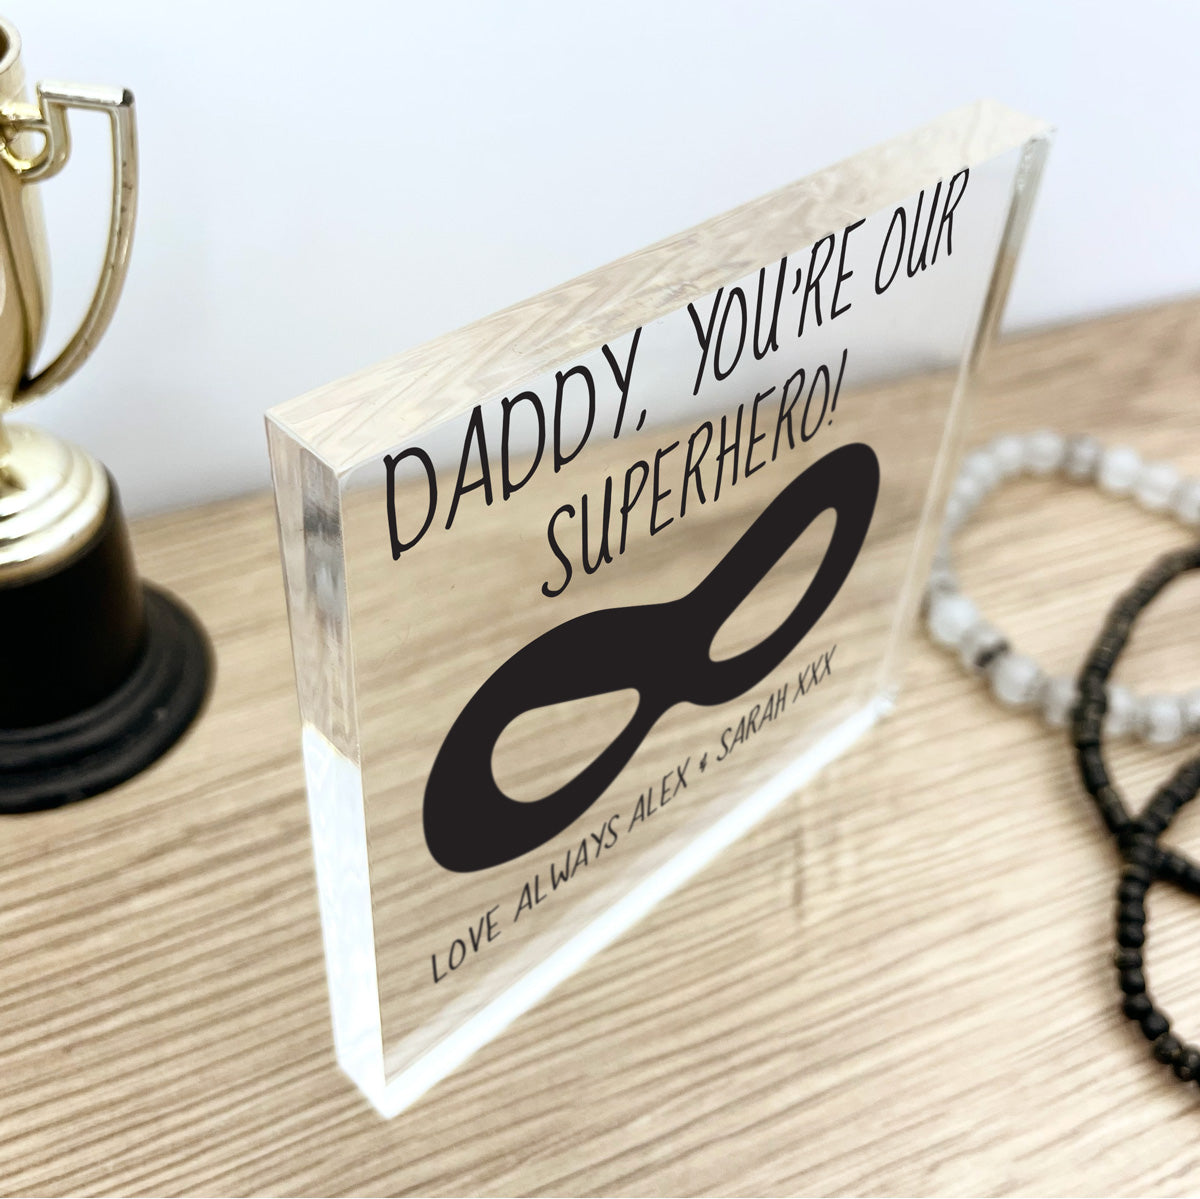 Personalised Daddy Our/My Superhero Freestanding Acrylic Block